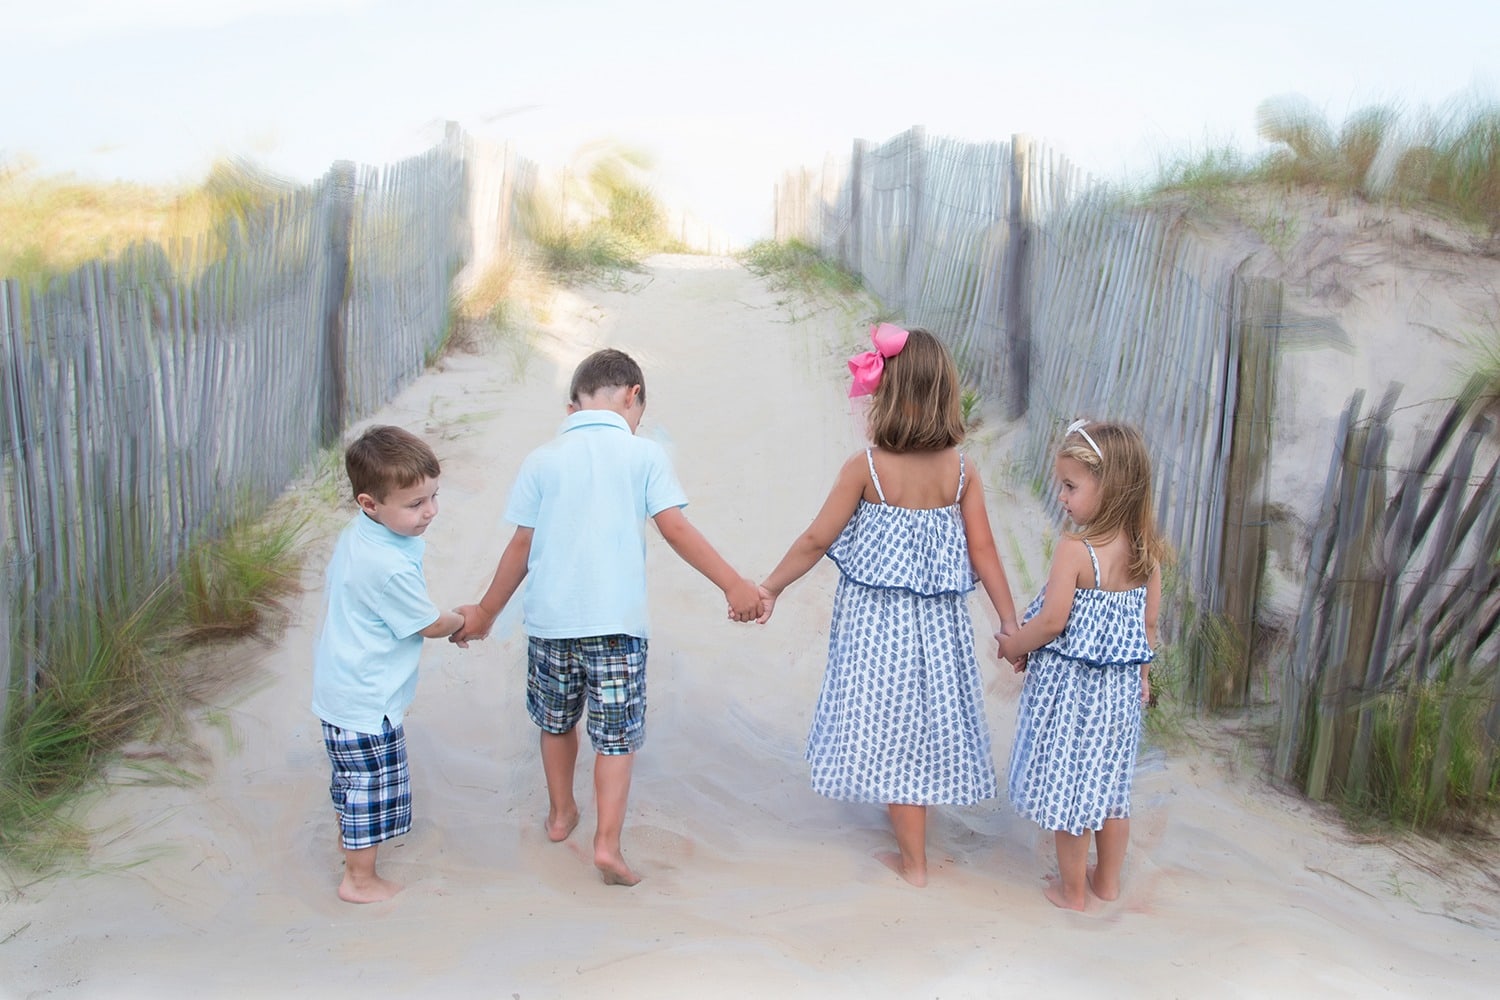 Children holding hand while walking on beach in matching outfits